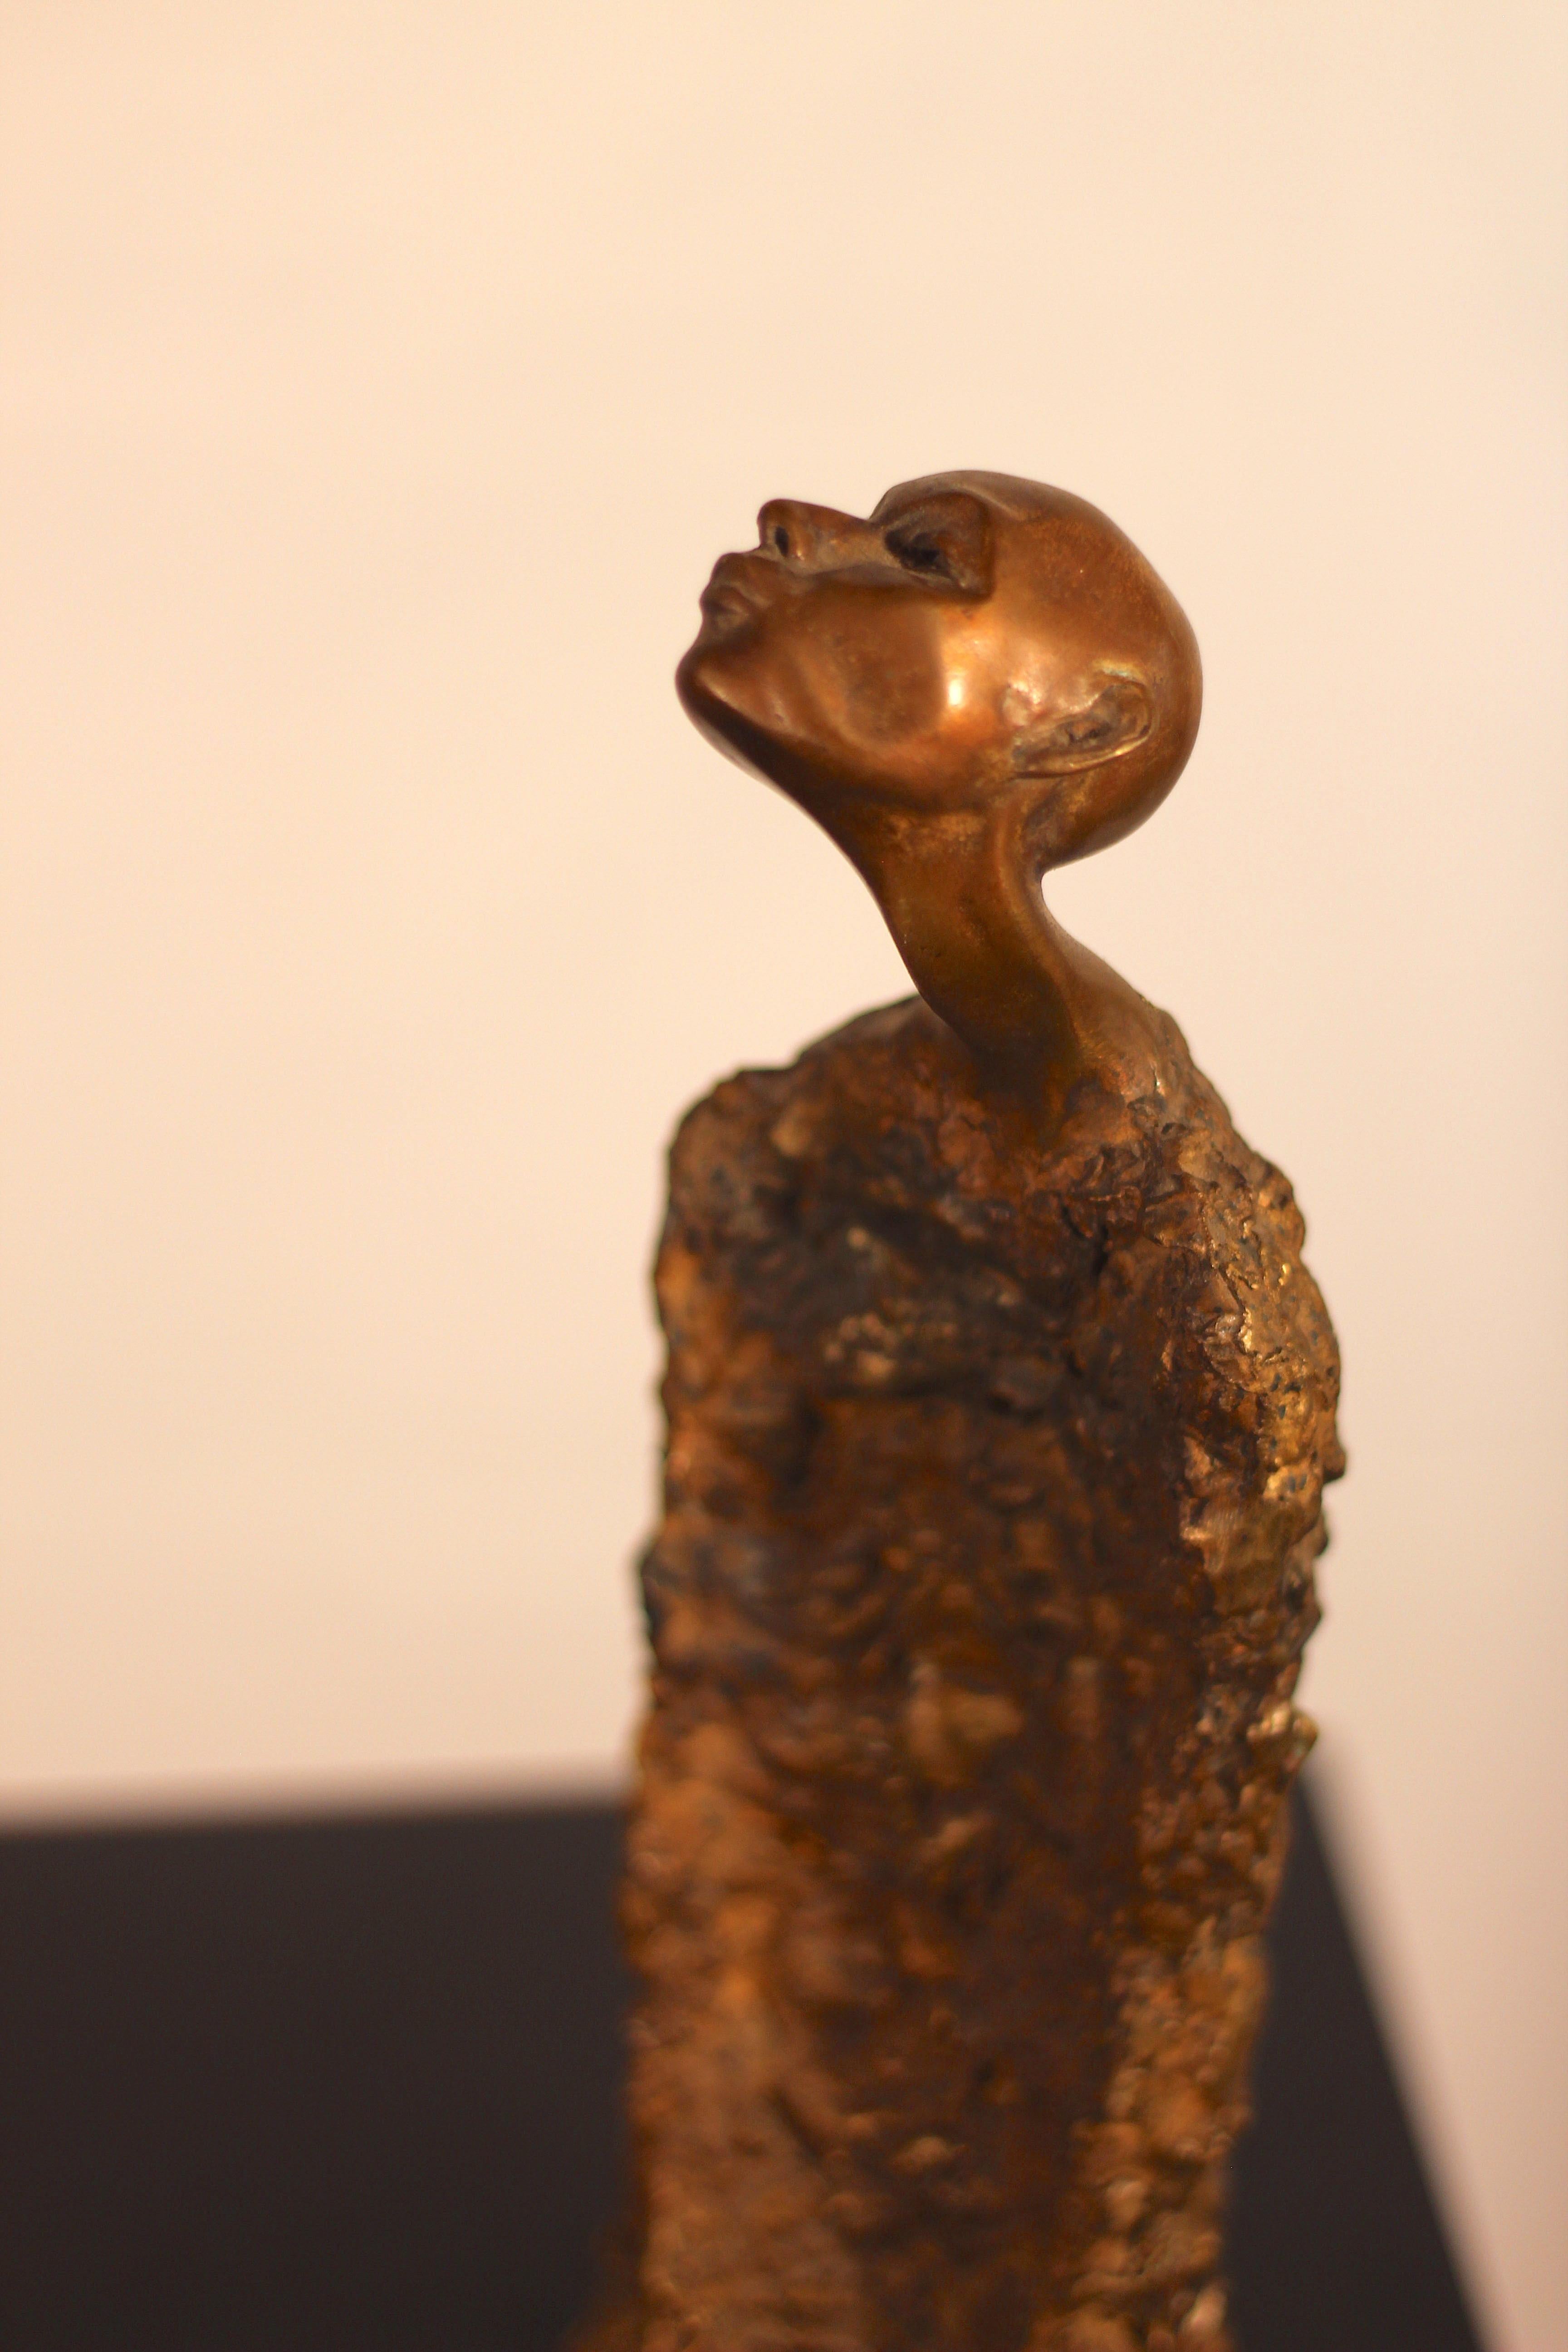 Contemporary Figurative Brutalist Bronze Sculpture, Mexican, Early 2000s For Sale